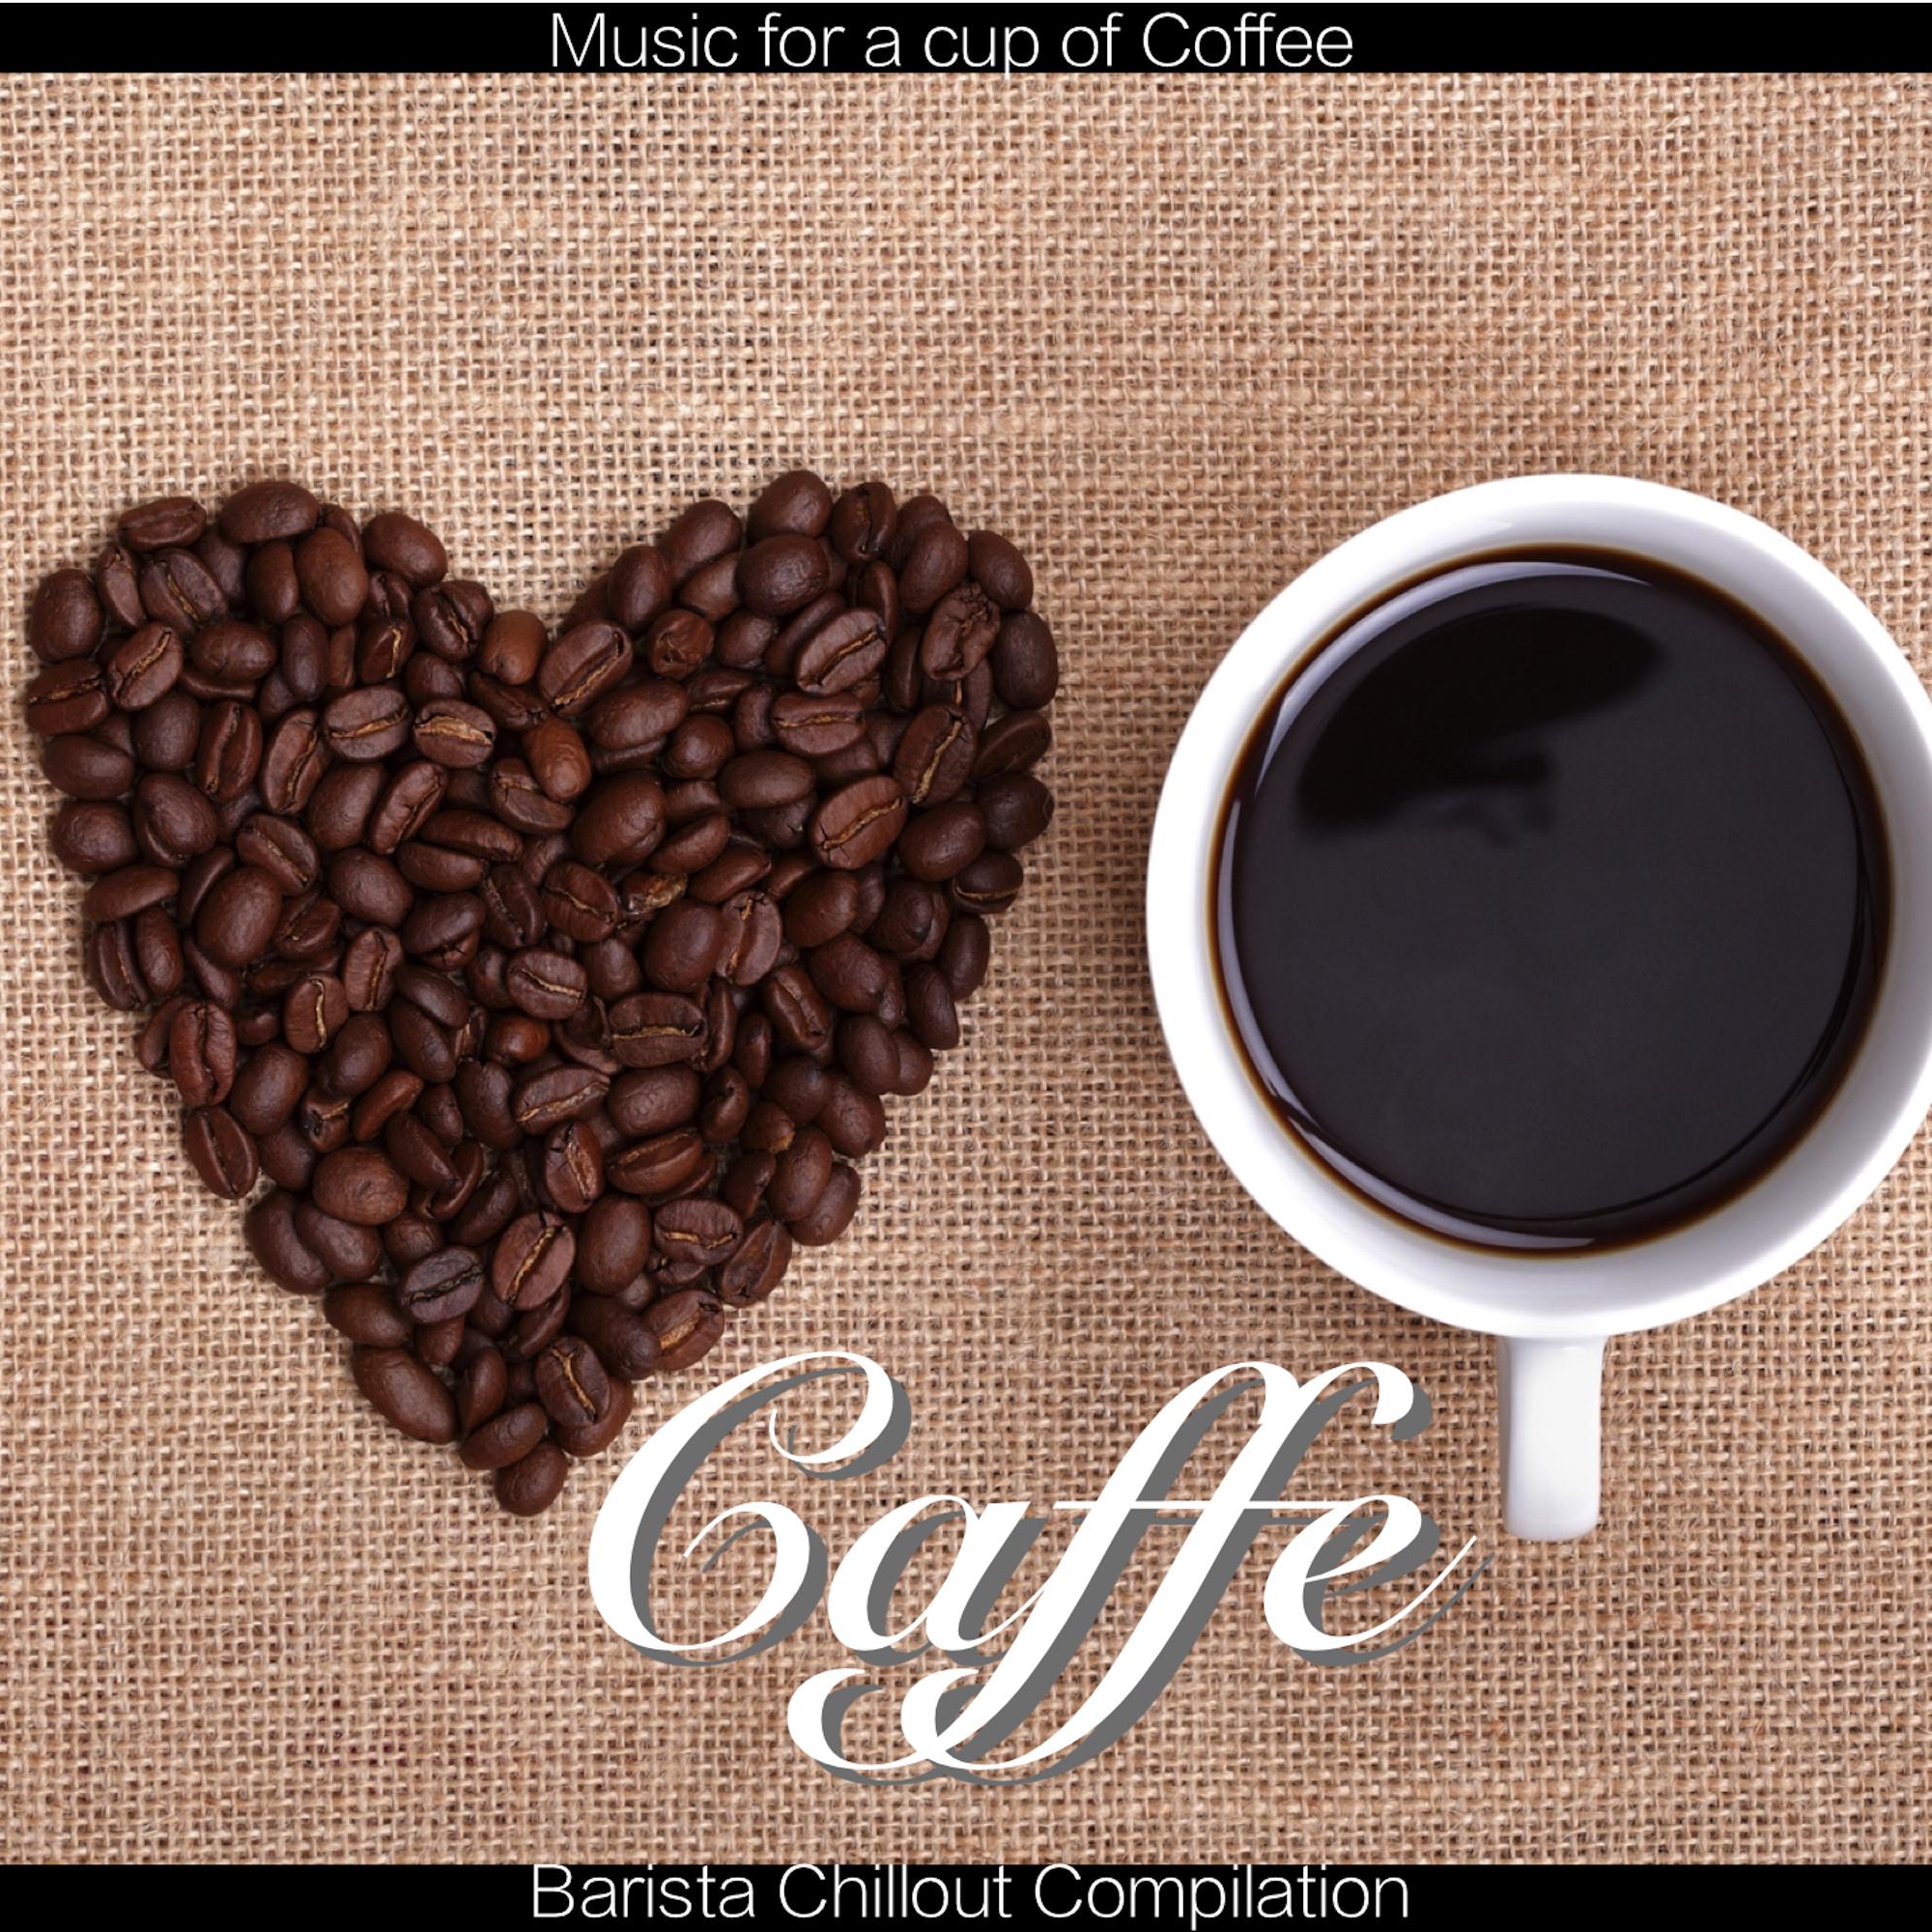 Caffe (Barista Chillout Compilation)